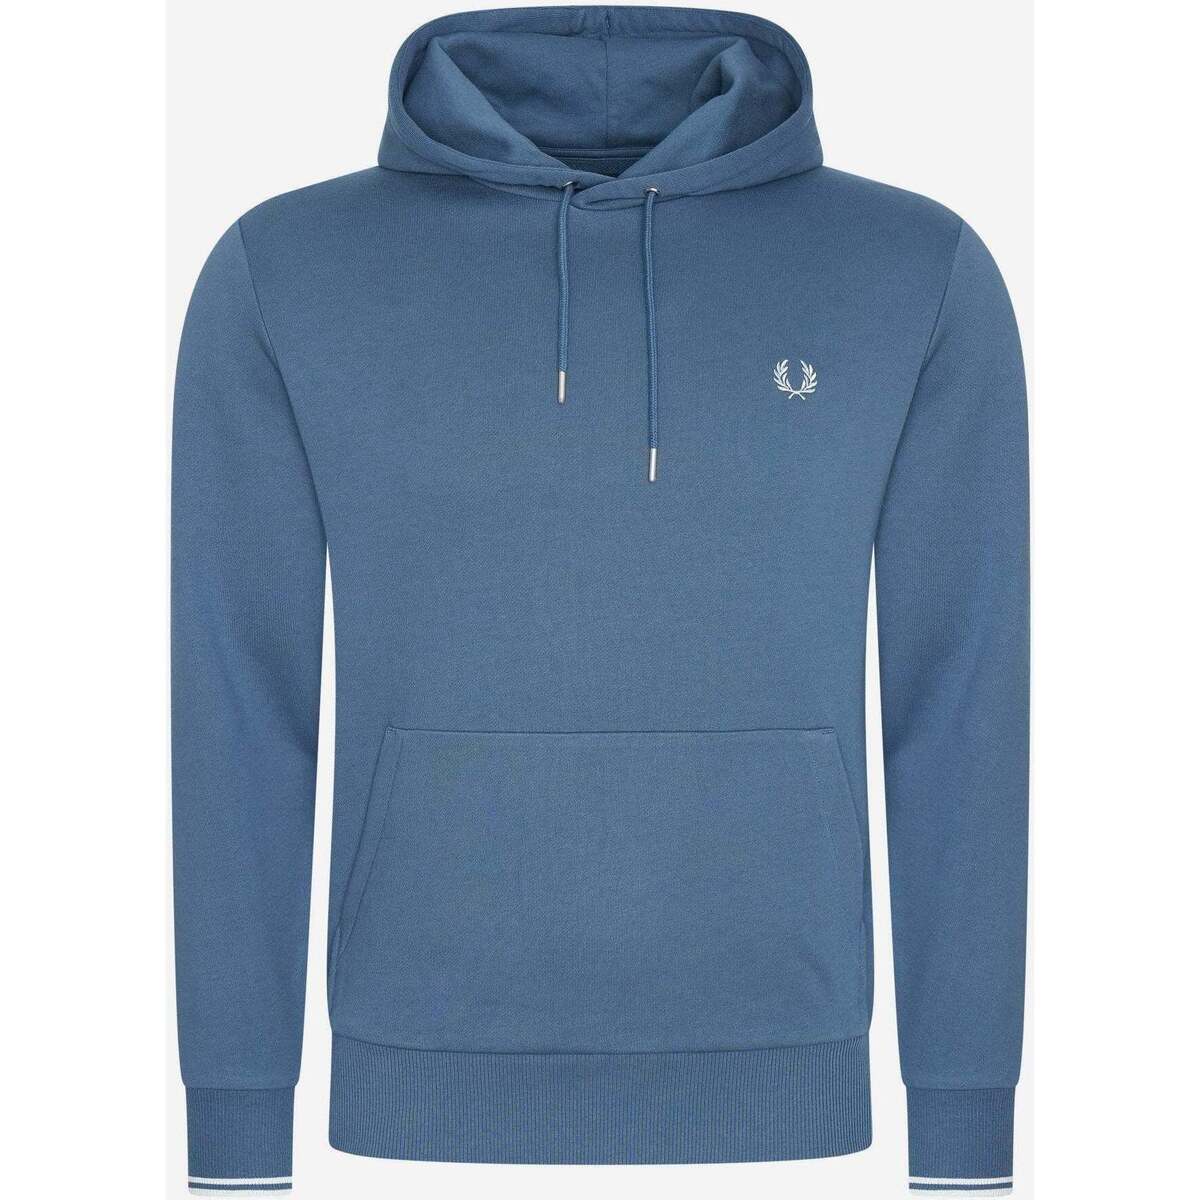 Textiel Heren Sweaters / Sweatshirts Fred Perry Tipped hooded sweatshirt Other